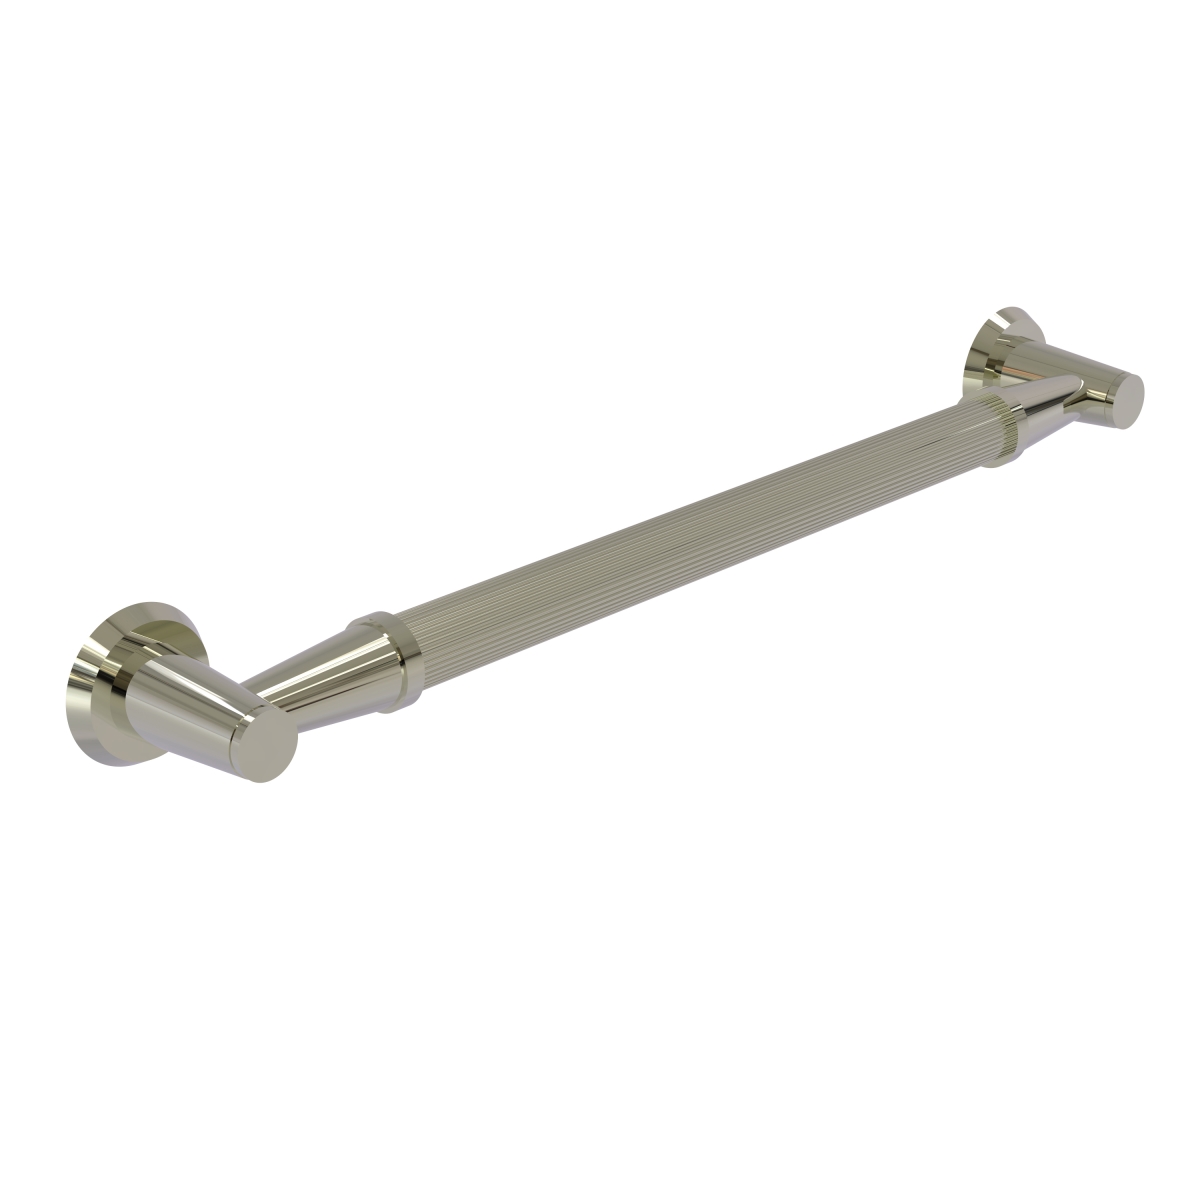 Picture of Allied Brass MD-GRR-24-PNI 24 in. Reeded Grab Bar, Polished Nickel - 3.5 x 26 x 24 in.